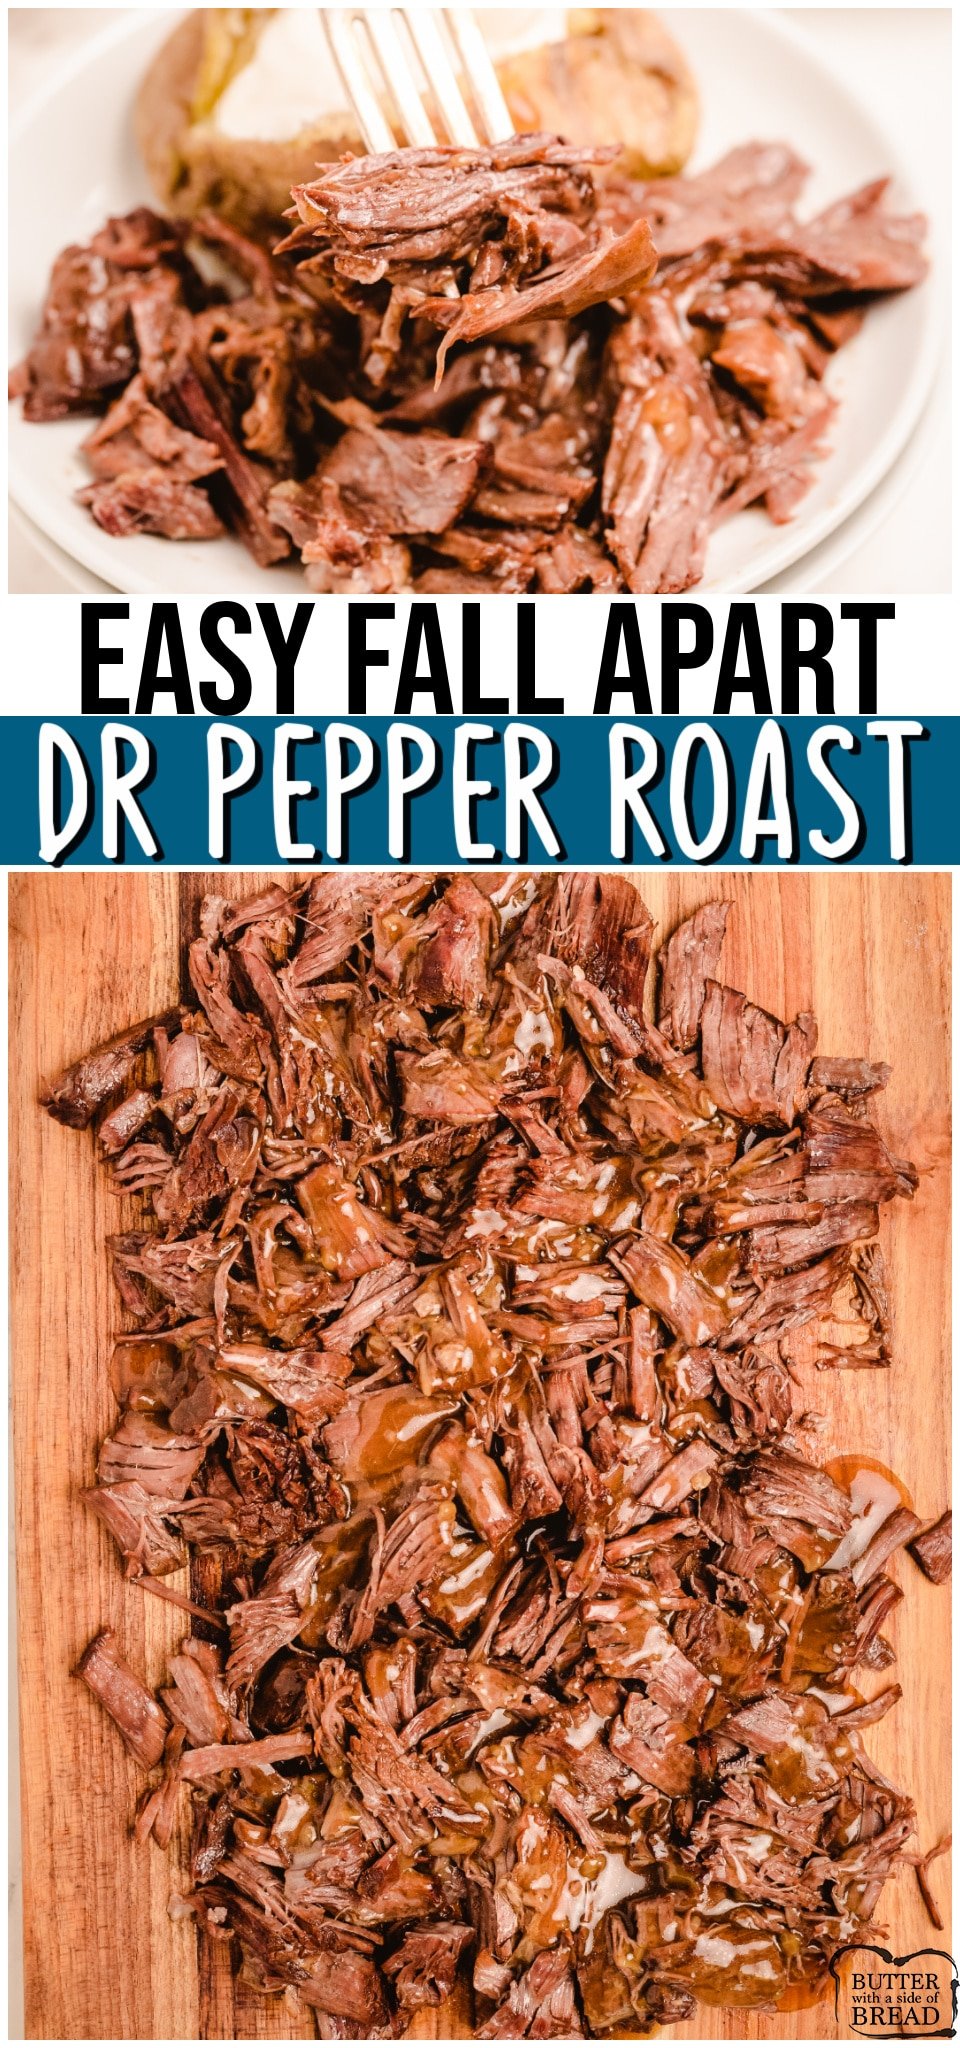 Slow Cooker Dr. Pepper Roast is an easy to make, tender roast made with just 5 ingredients. Packed full of flavor, this crockpot roast recipe is perfect for any Dr. Pepper lover.